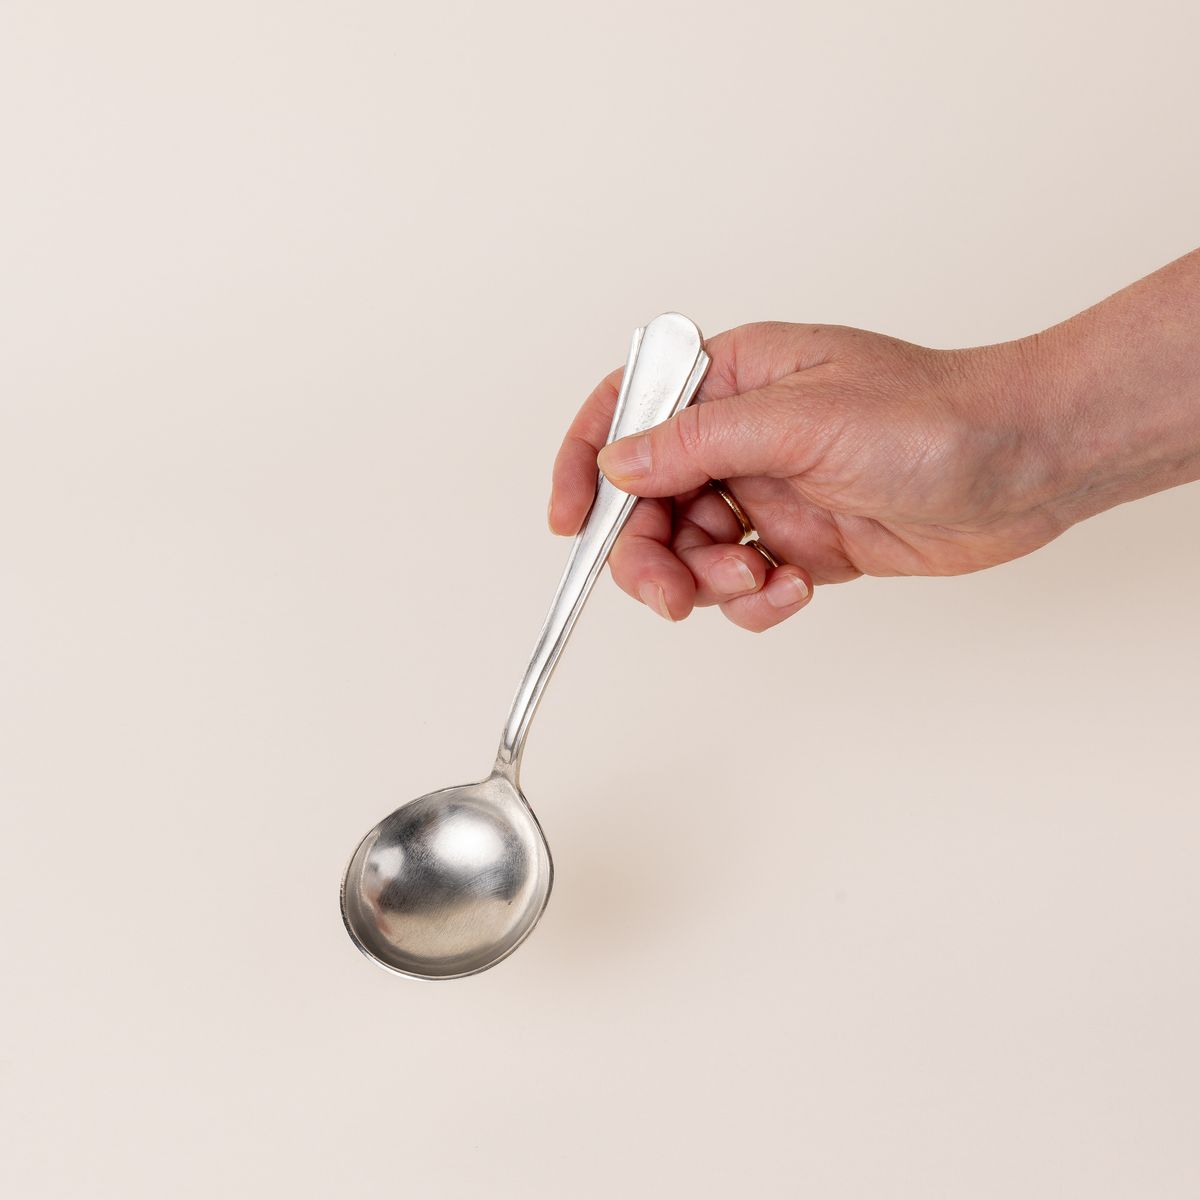 A hand holding a silver spoon with a skinny handle that gets a little wider and round on the end. The bowl of a spoon is circular.